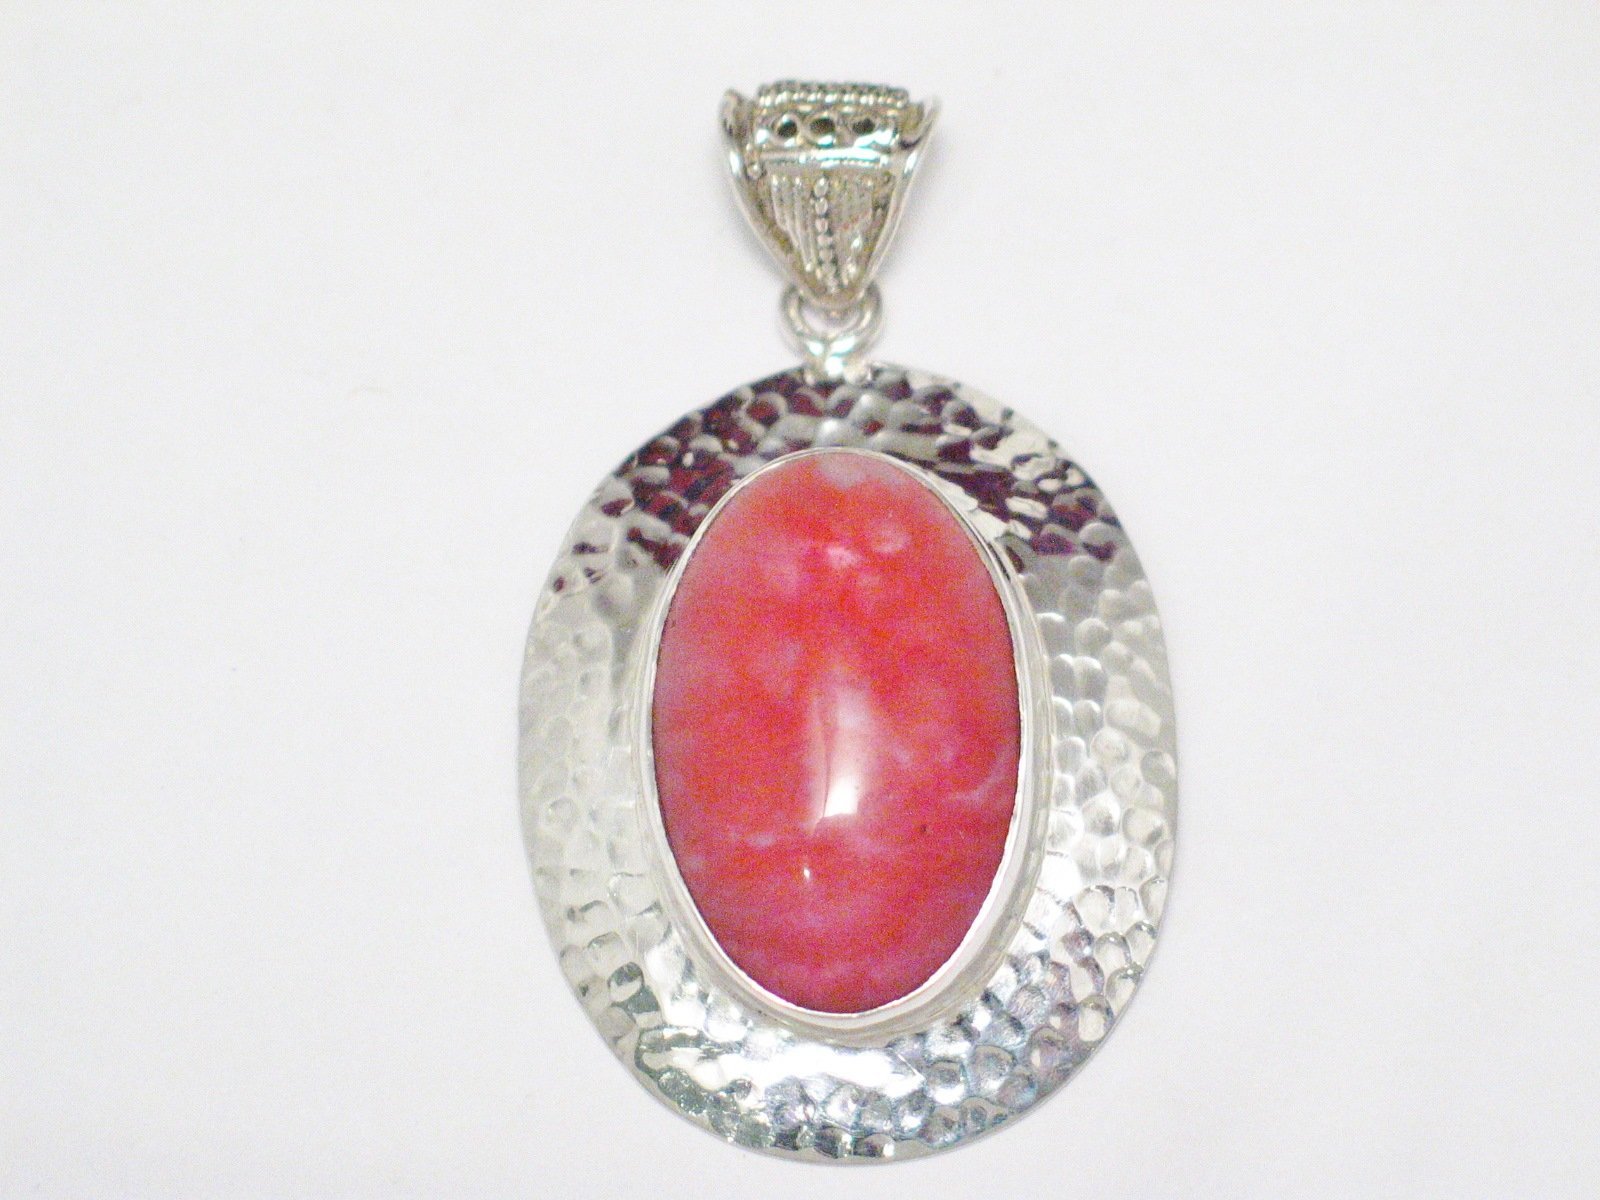 Pendant | Large Sterling Silver Oval Hammered Cherry Quartz Pendant | Boss Overstock Jewelry